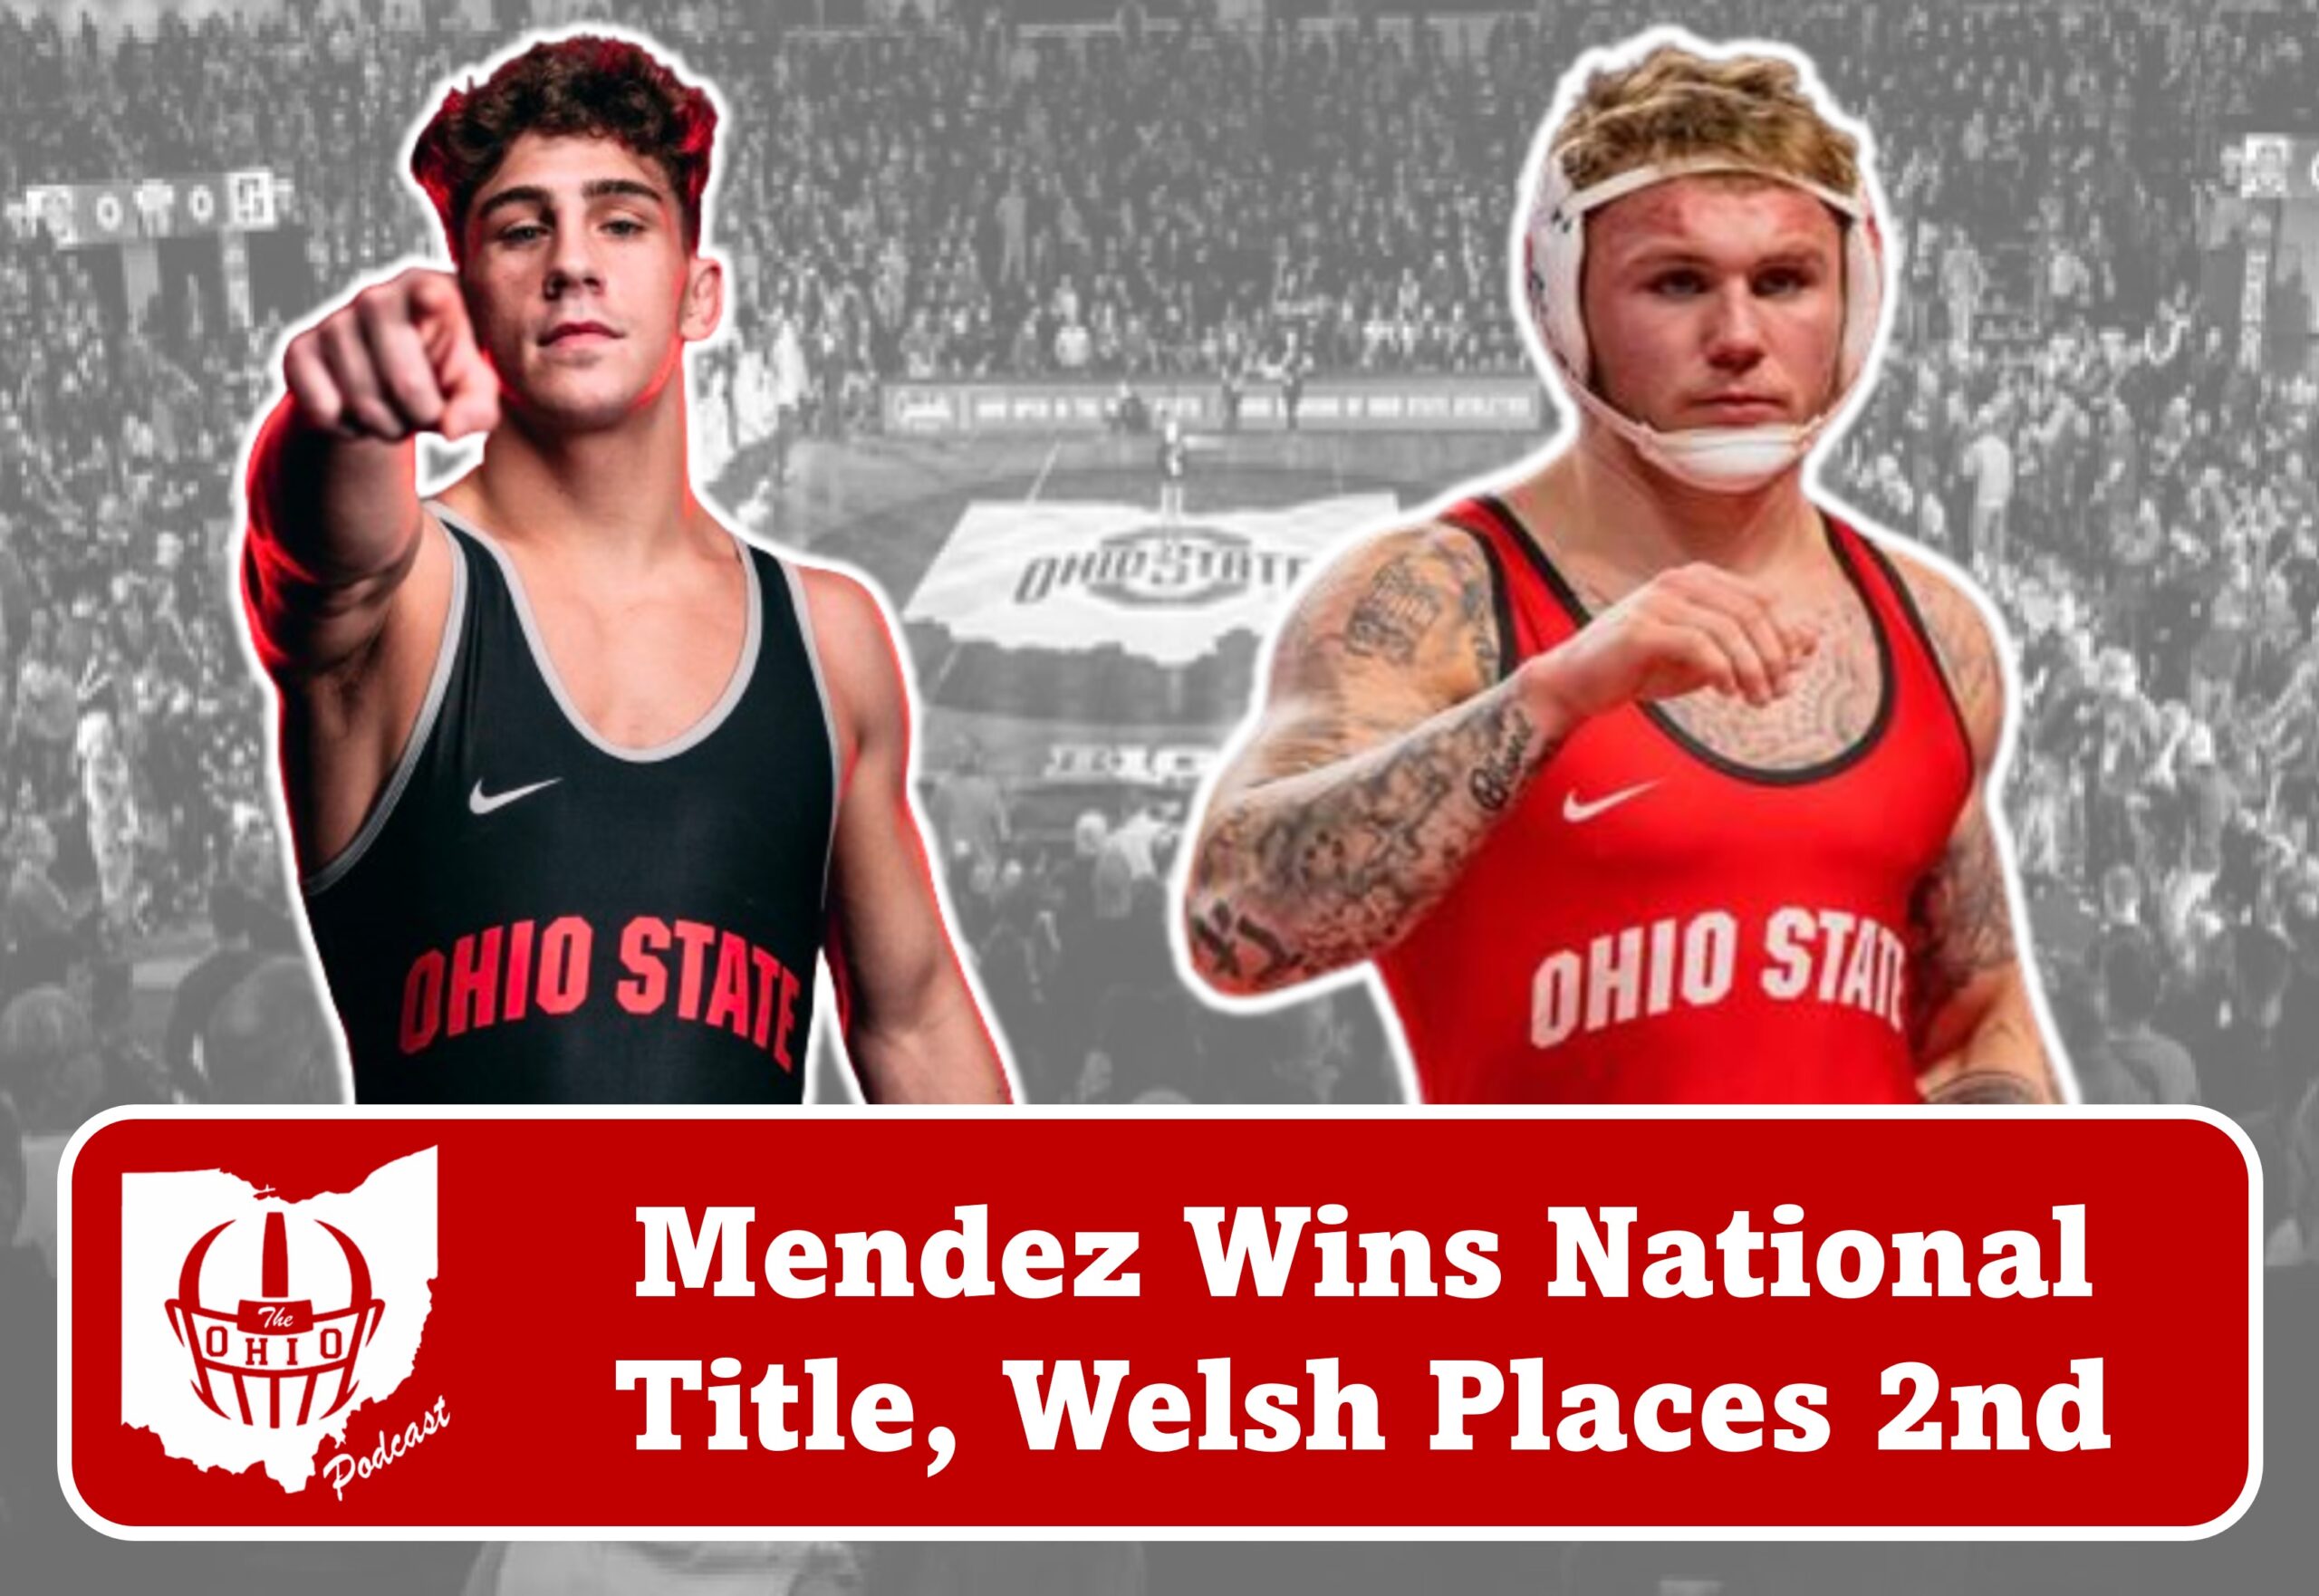 Mendez Wins National Title, Welsh Places 2nd